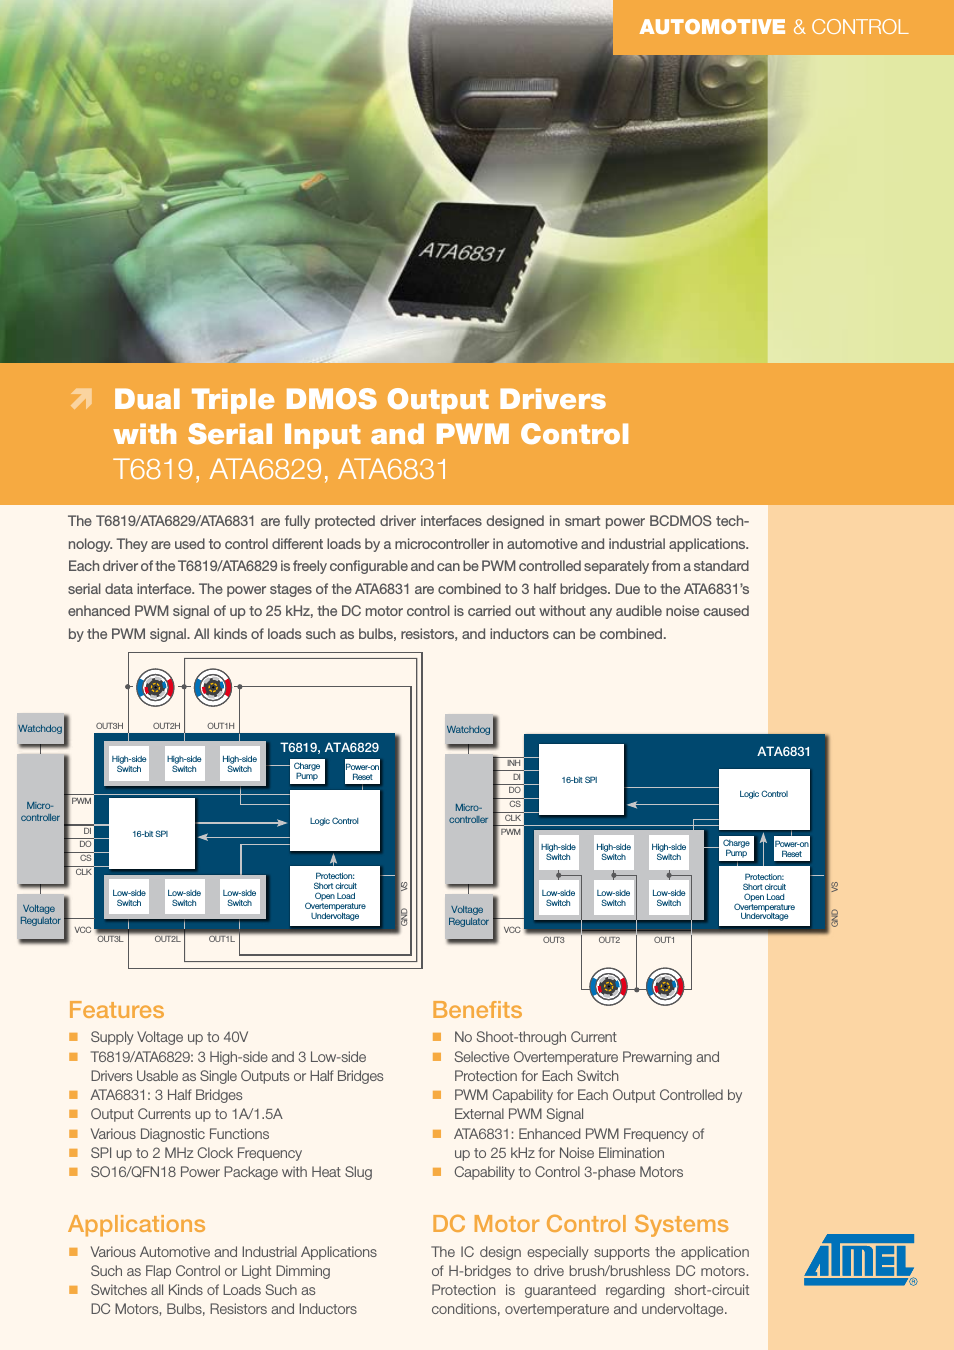 Dual Triple DMOS Output Drivers with Serial Input and PWM Control T6819